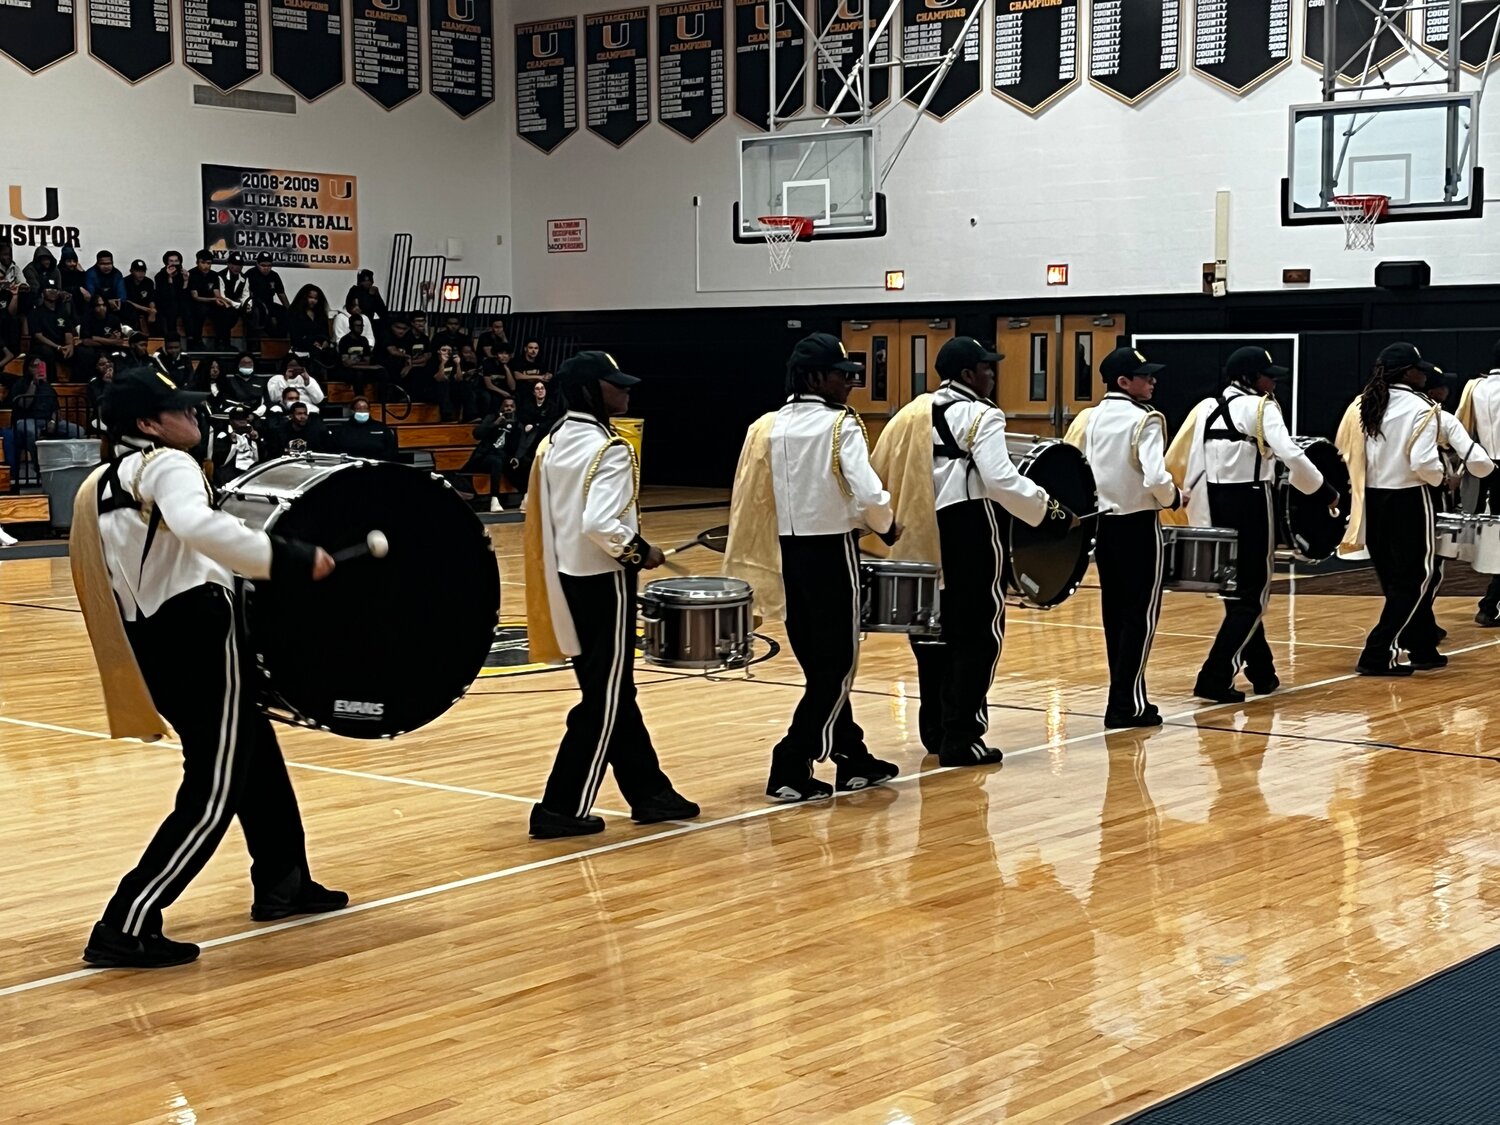 The Uniondale marching band, Pure Gold, performing at Sunday’s Percussion Night.